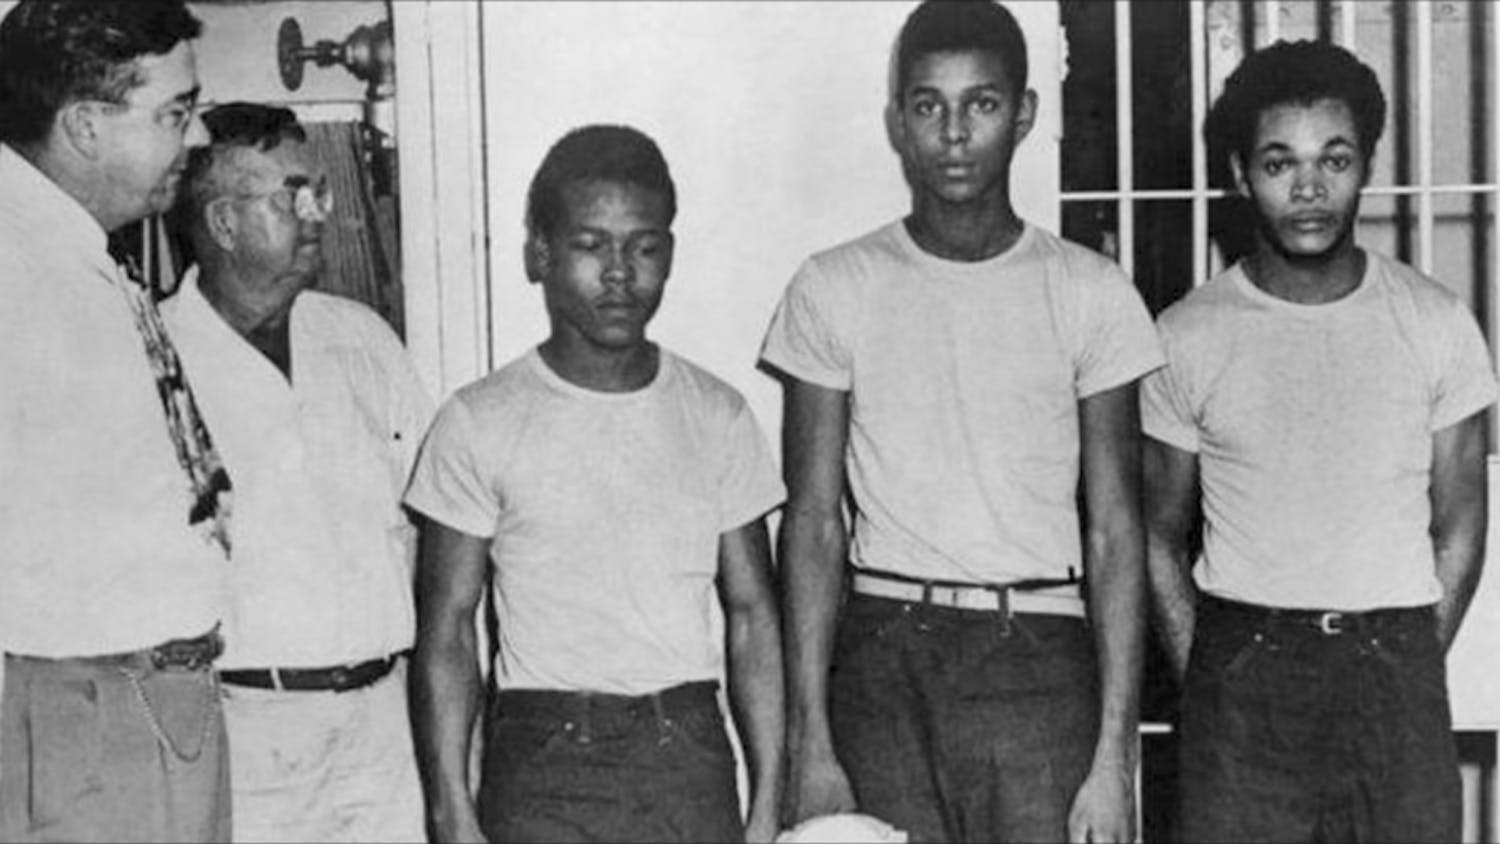 Lake County Sheriff Willis McCall, far left, and an unidentified man stand next to Walter Irvin, Samuel Shepherd and Charles Greenlee, from left, in Florida. The three men along with a fourth were charged with rape in 1949. Florida Gov. Ron DeSantis and a Cabinet granted posthumous pardons Friday, Jan. 11, 2019, to Shepherd, Irvin, Charles Greenlee and Ernest Thomas, the four  were charged with rape in 1949. Courtesy of Associated Press